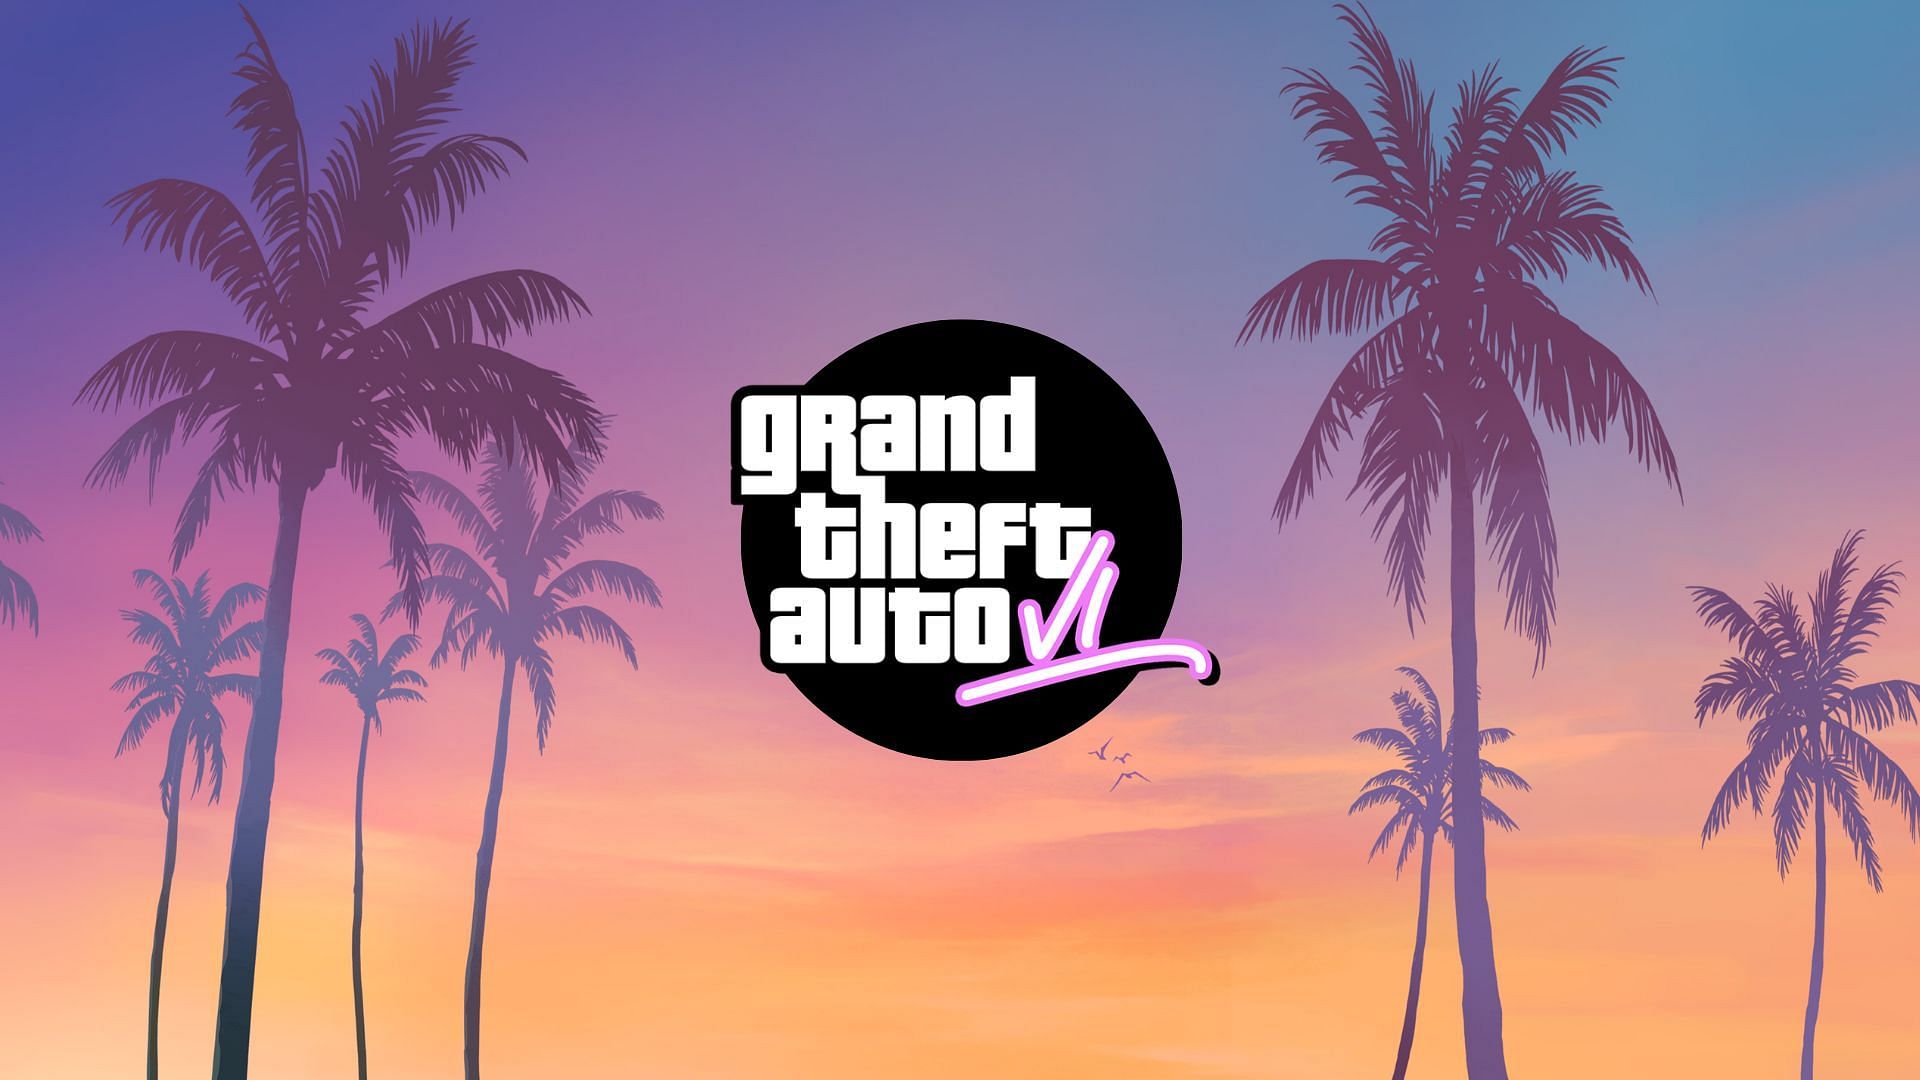 GTA 6 graphics: First look at the official graphics from the trailer